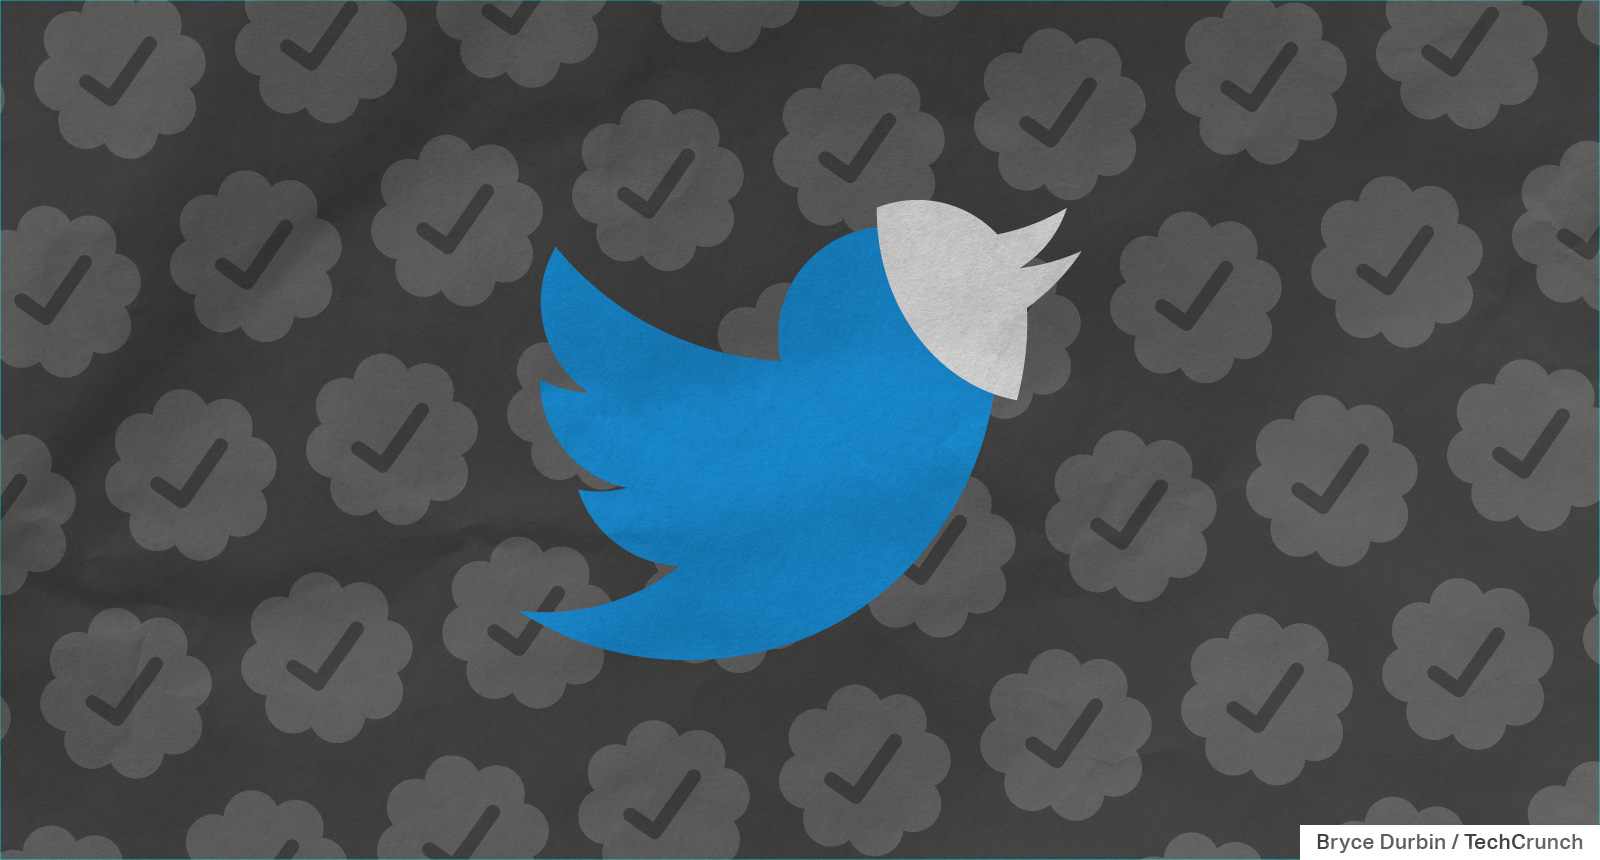 twitter bird with mask, background of verified check marks